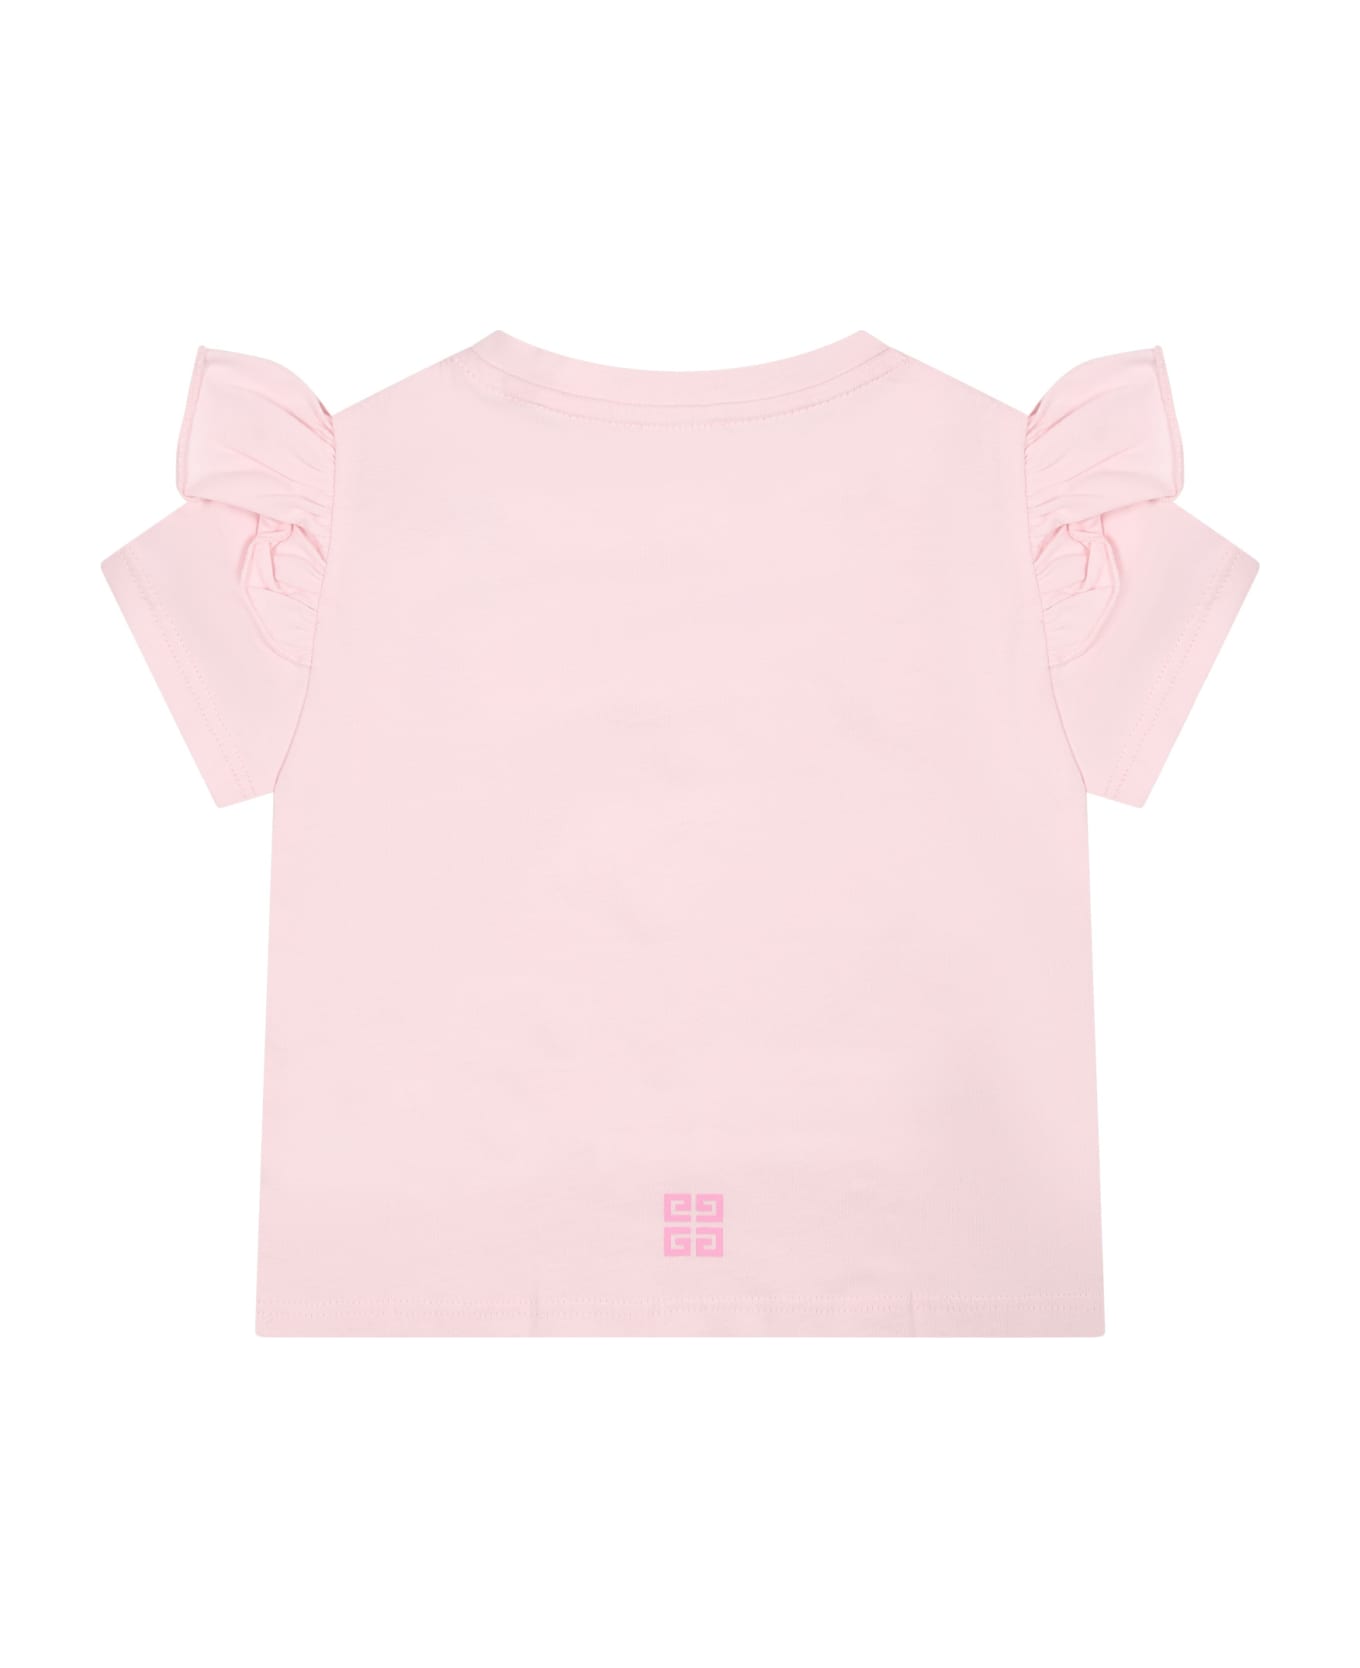 Givenchy Pink T-shirt For Baby Girl With Logo - Pink